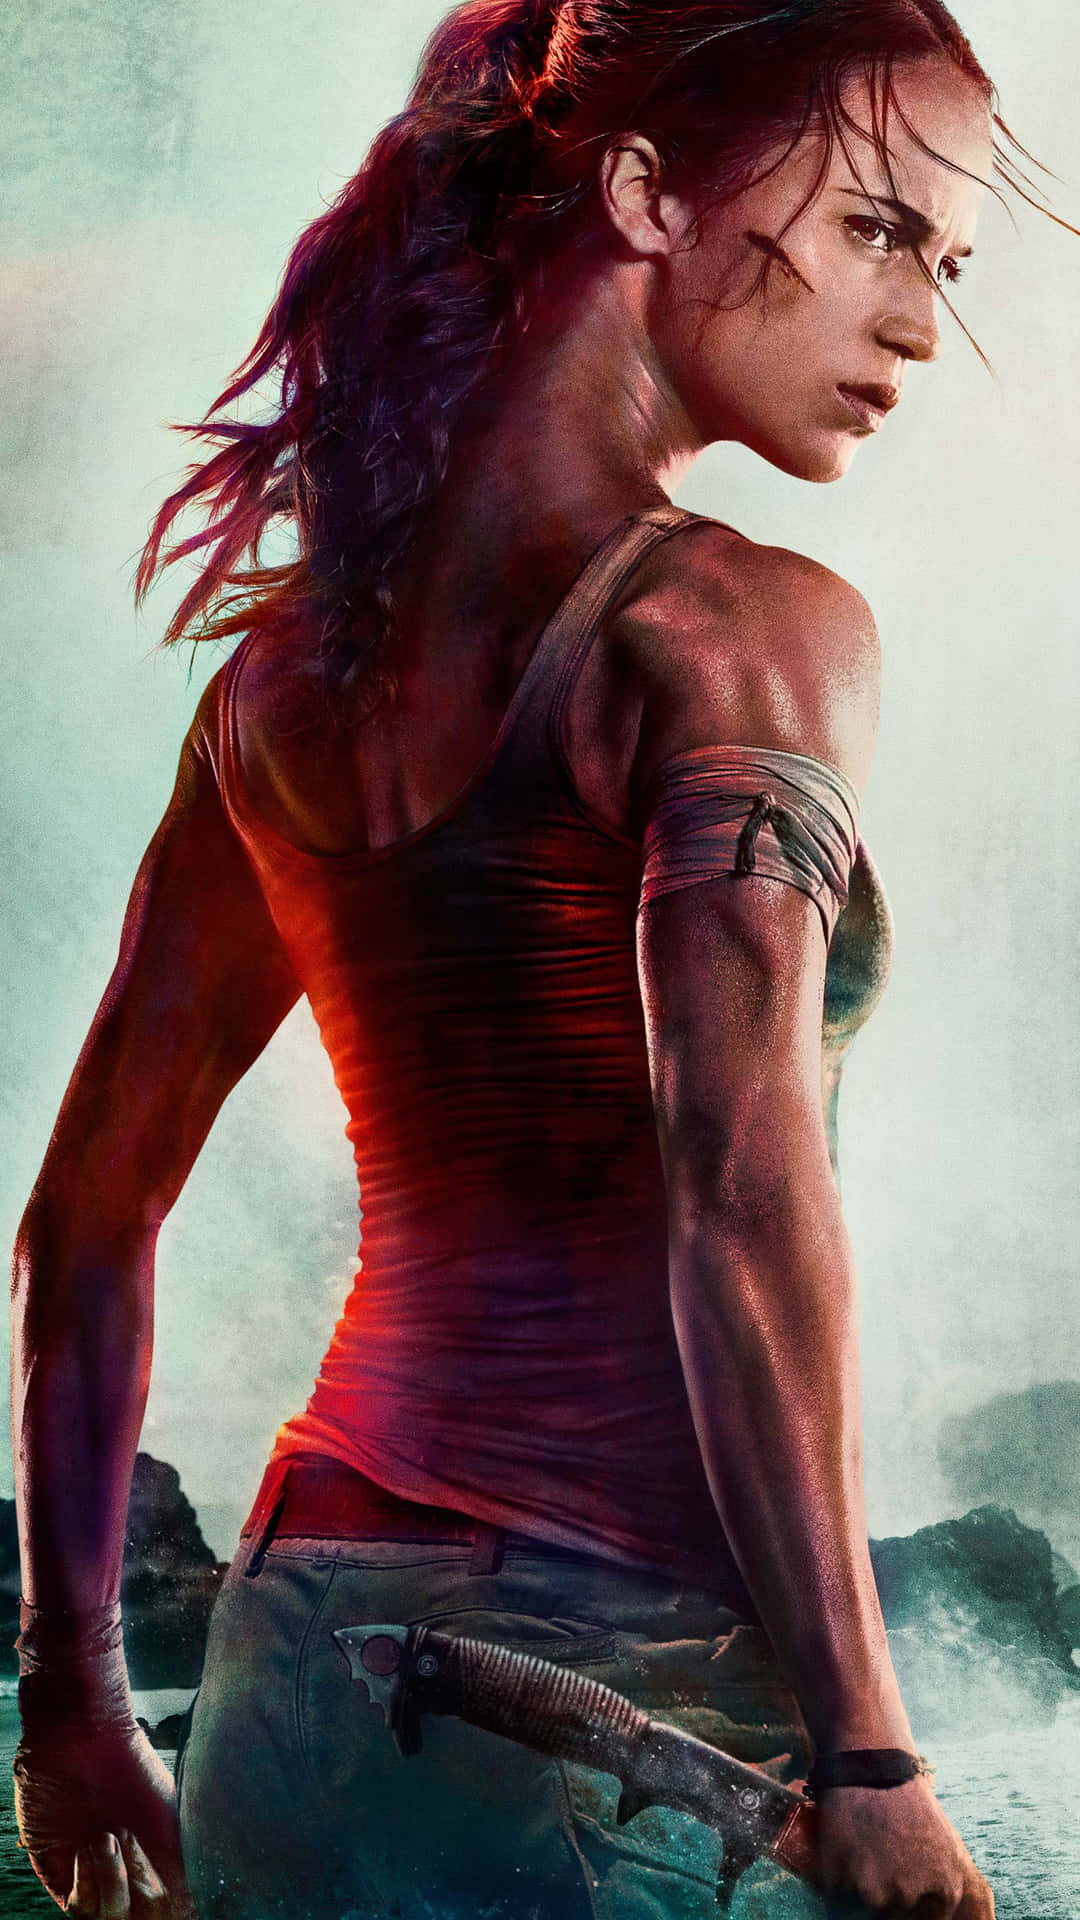 Adventure awaits with this epic Tomb Raider themed iPhone 5s Wallpaper